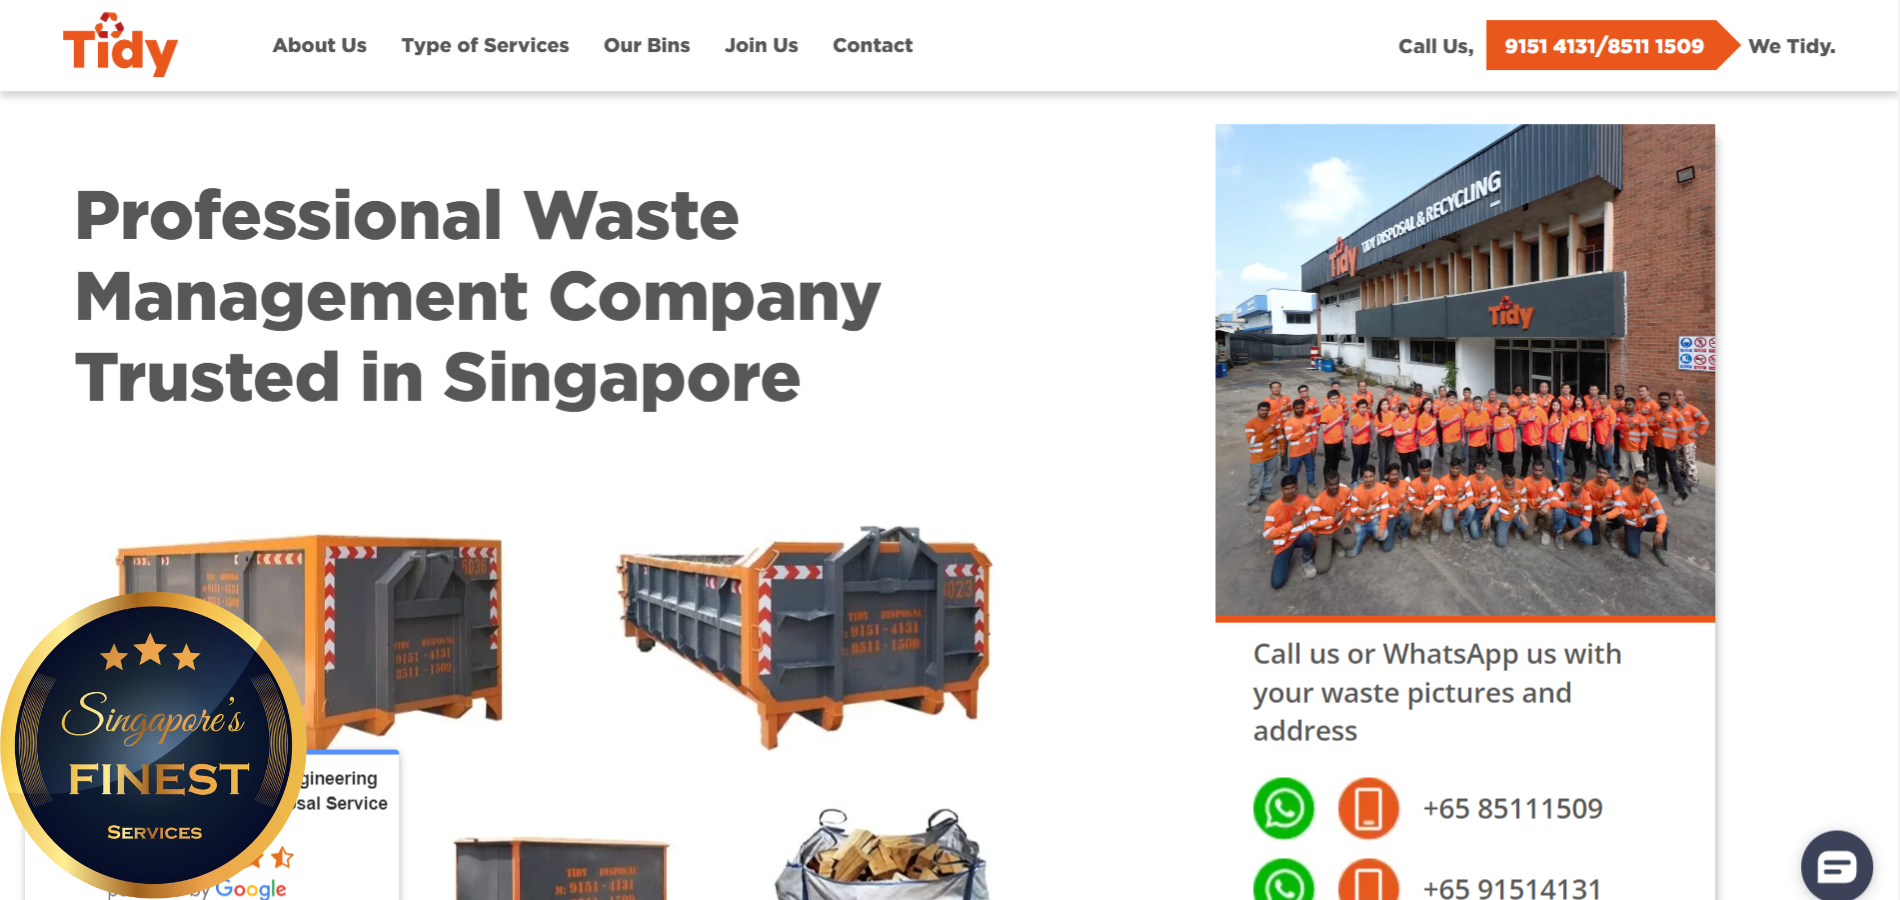 The Finest Waste Management in Singapore